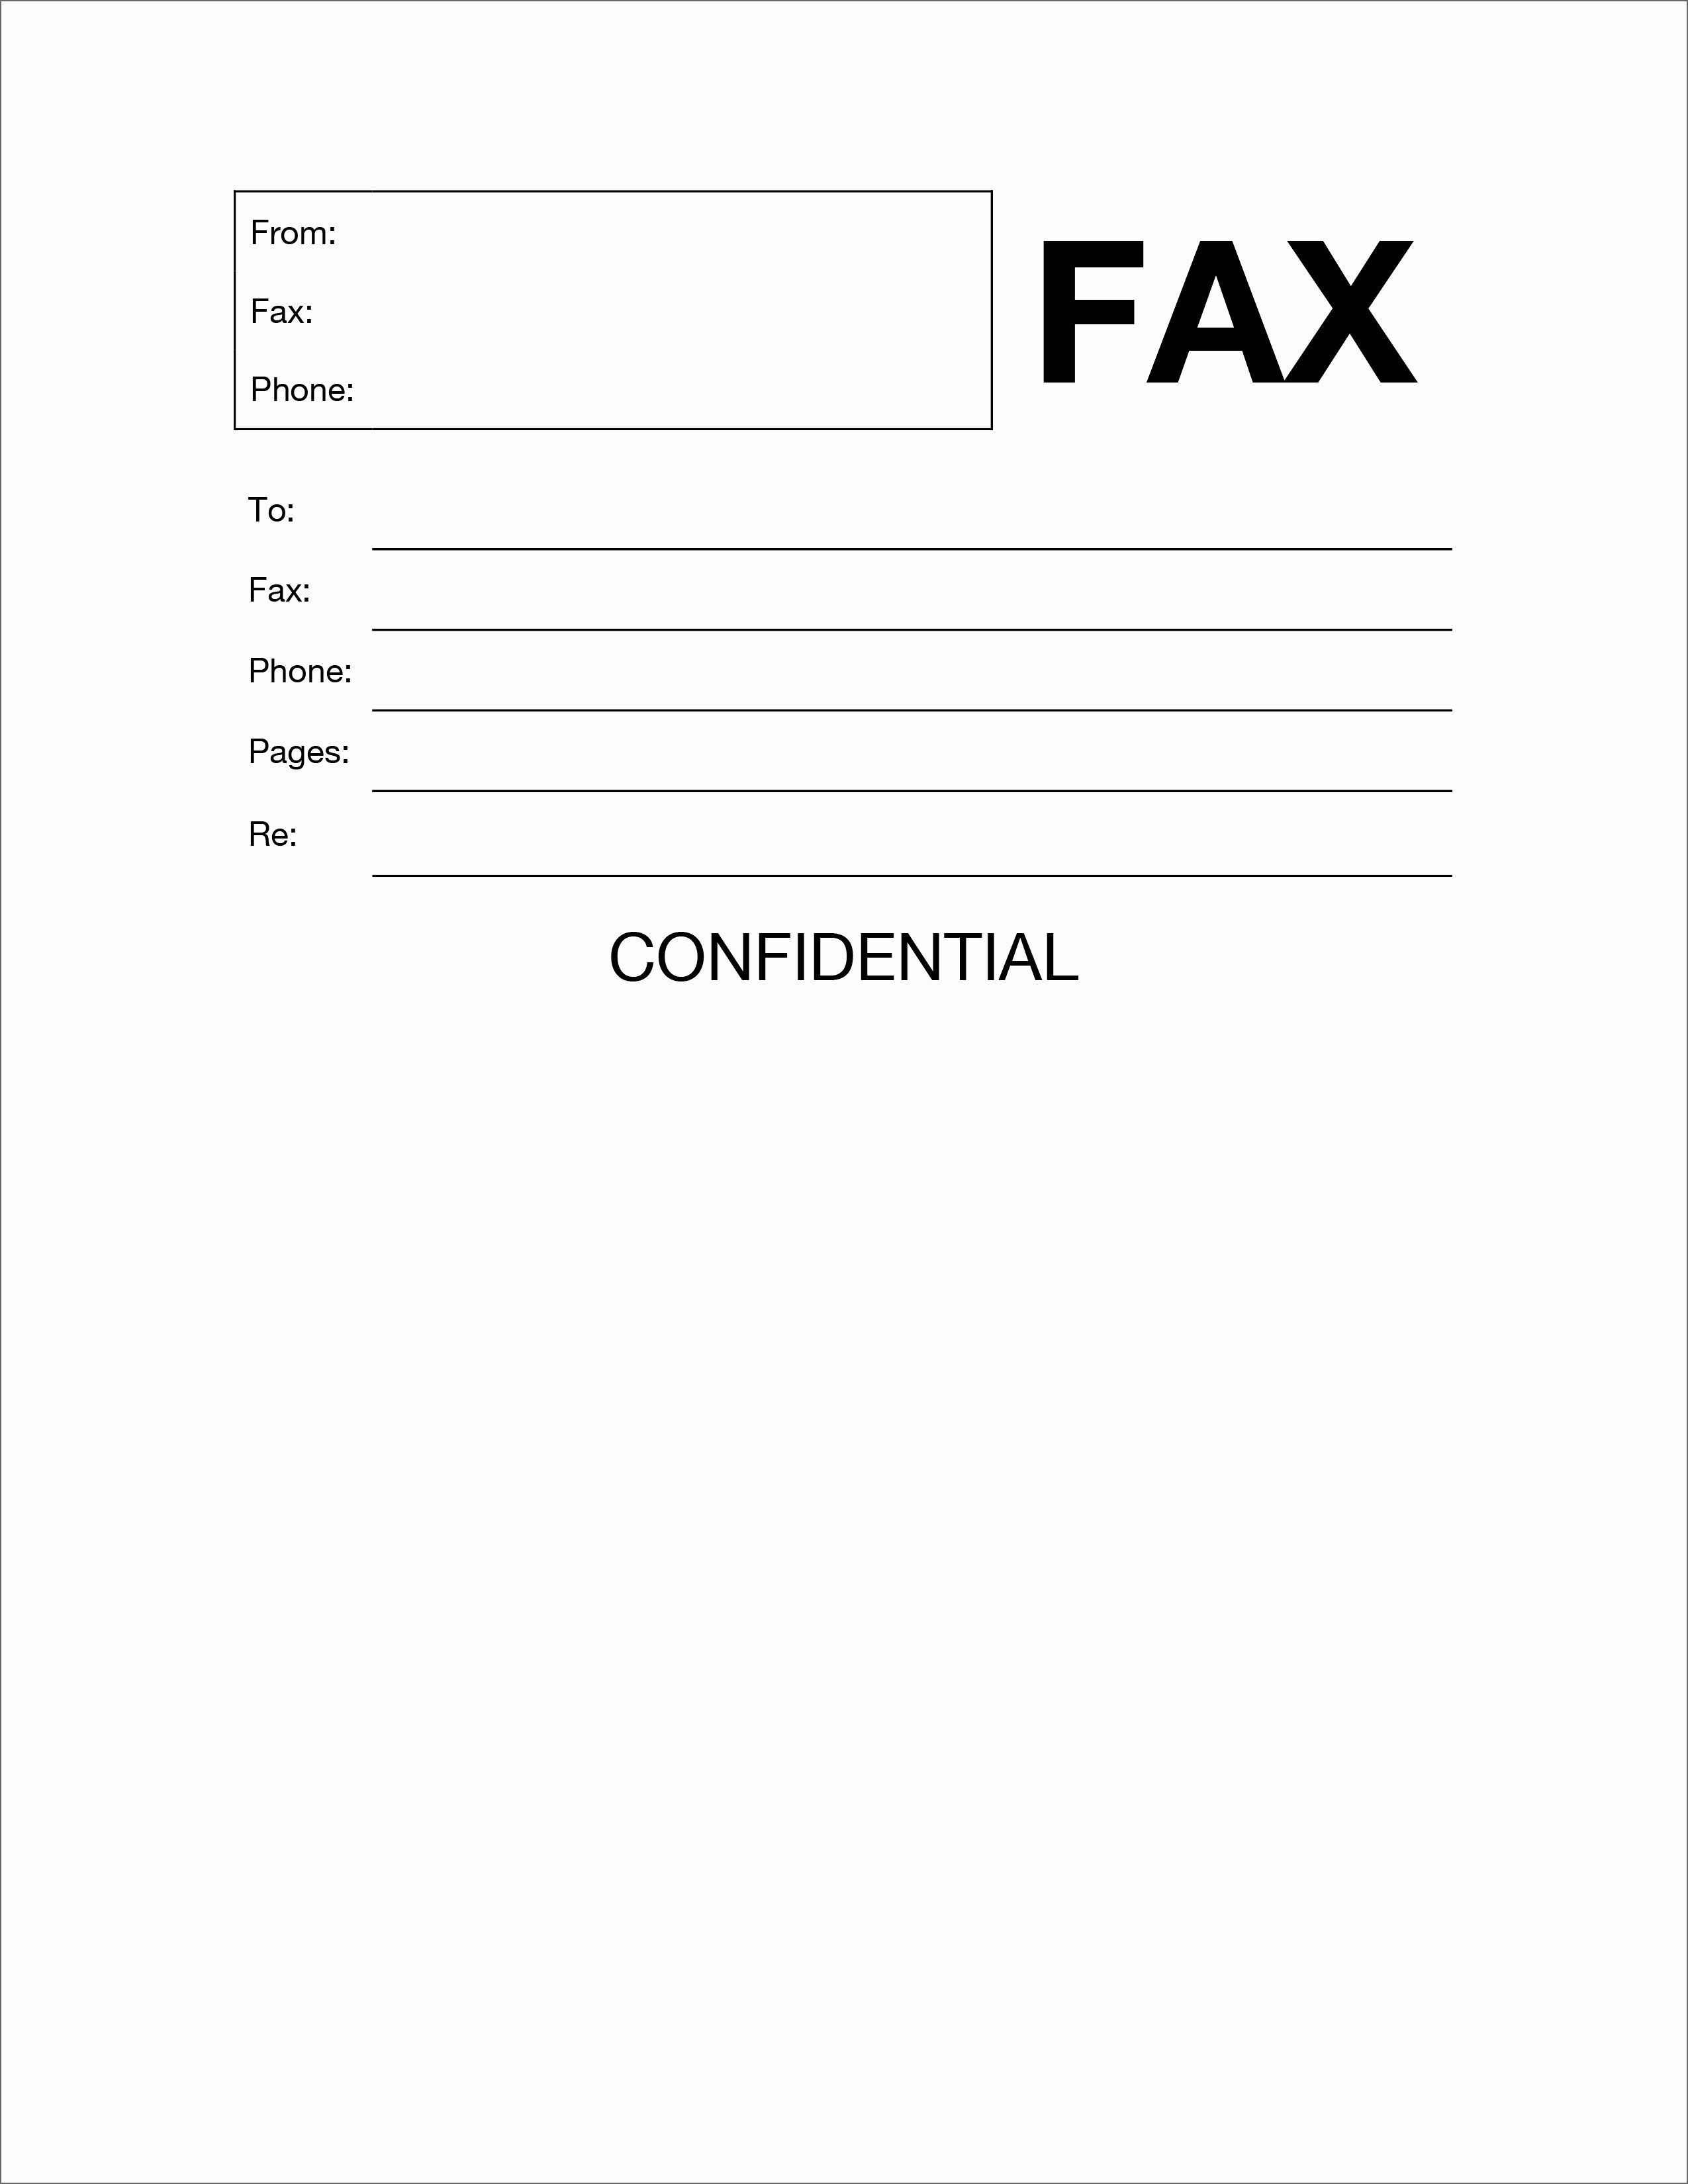 Fax Cover Sheet Template Lovely 20 Free Fax Cover Templates Sheets In Microsoft Fice Docx